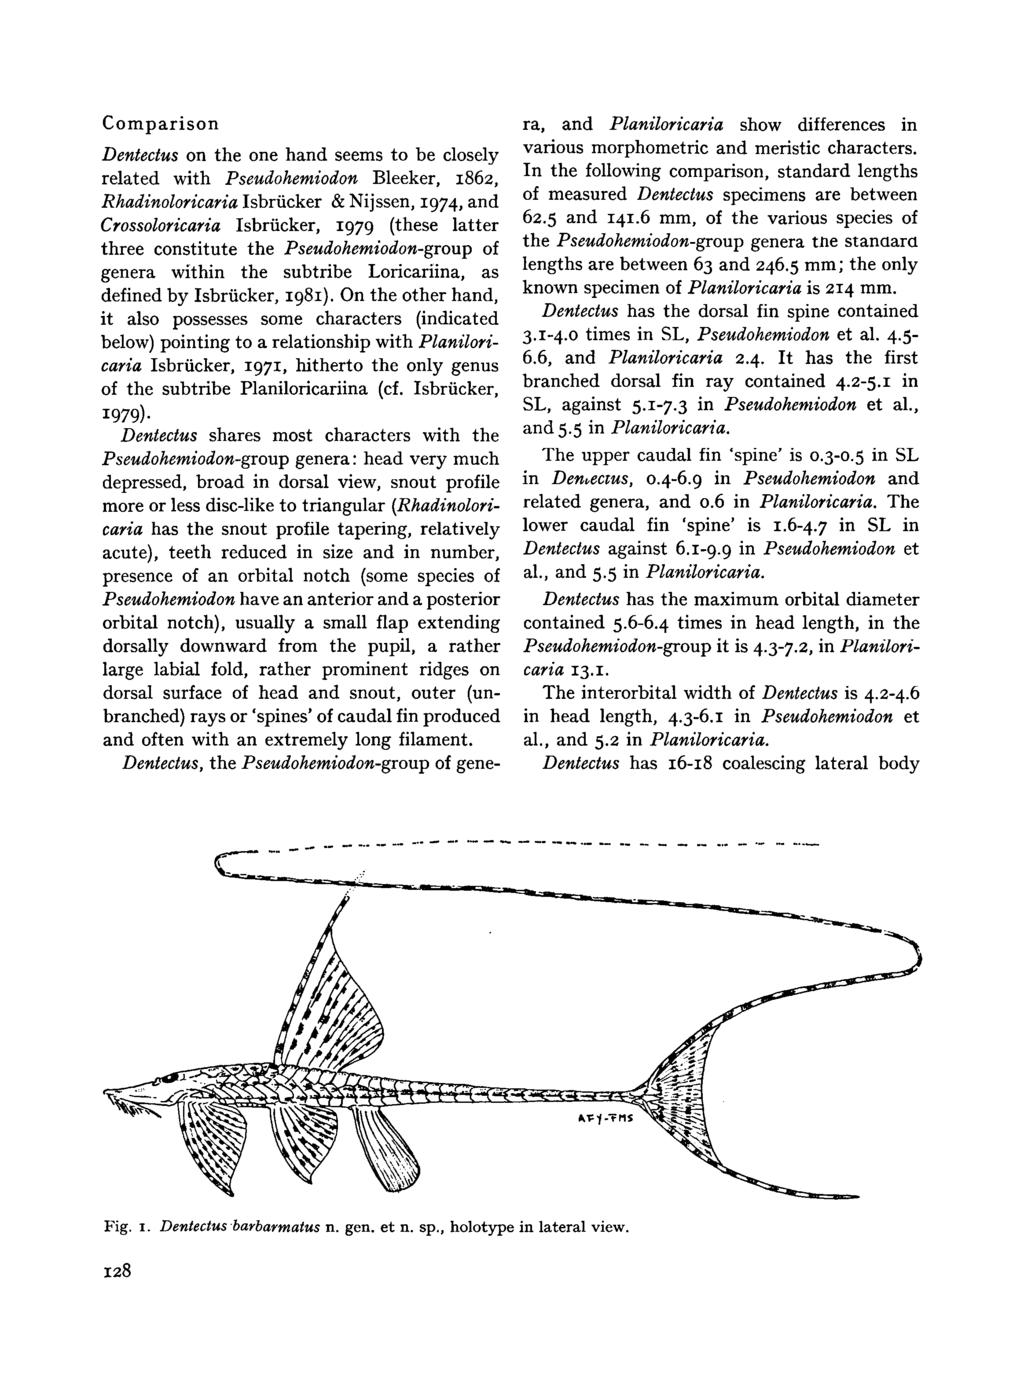 Comparison Dentectus, the Pseudohemiodon- group of genera, and Planiloricaria show differences in Dentectus on the one hand seems to be closely related with Pseudohemiodon Bleeker, 1862,